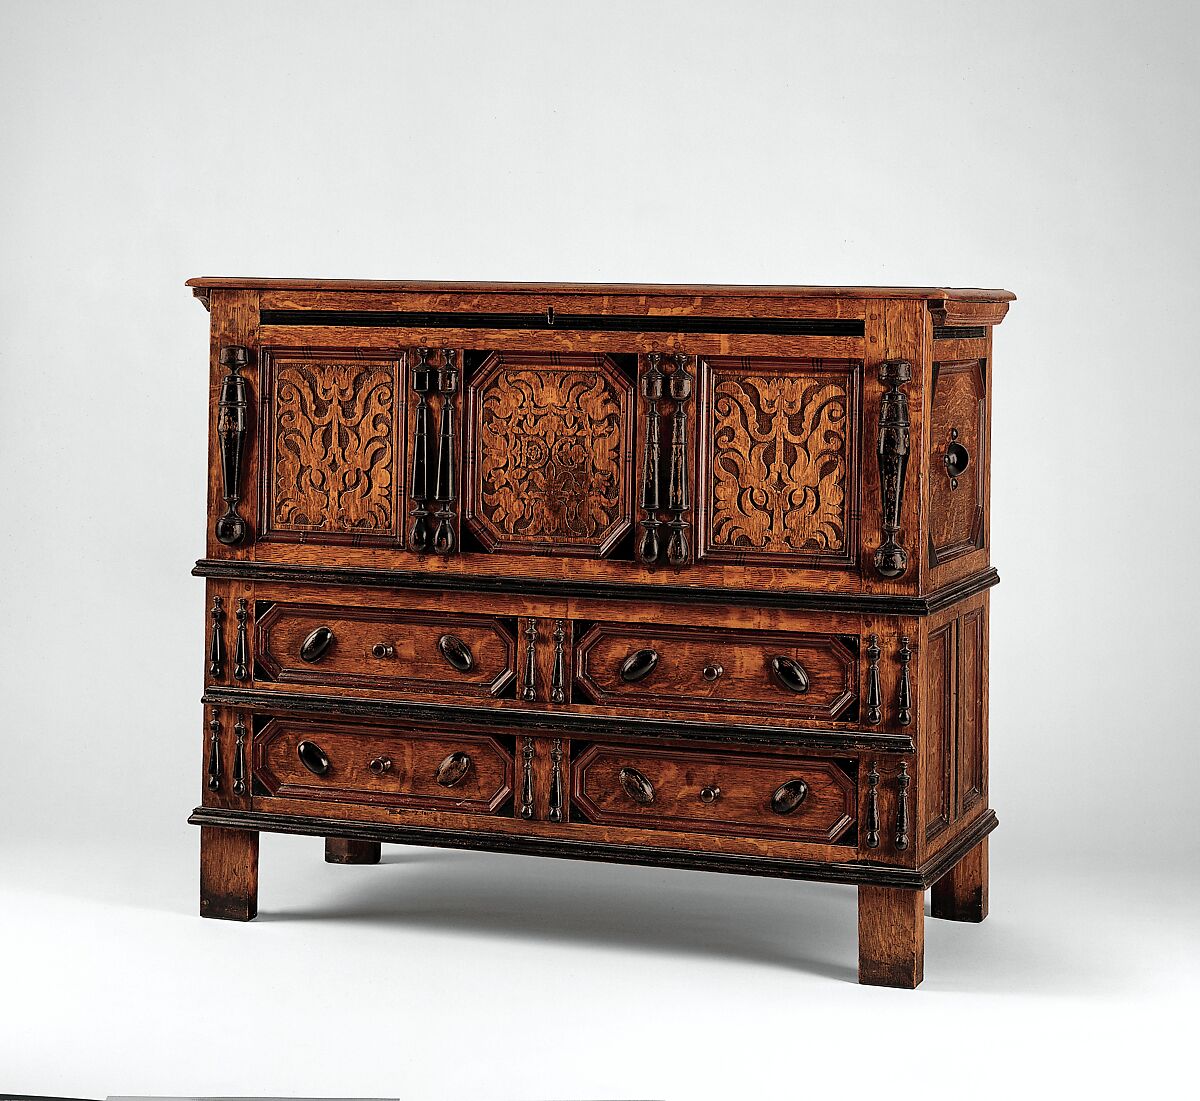 Chest with drawers, Workshop of Peter Blin (ca. 1675–1725), White oak, yellow pine, white cedar, American 